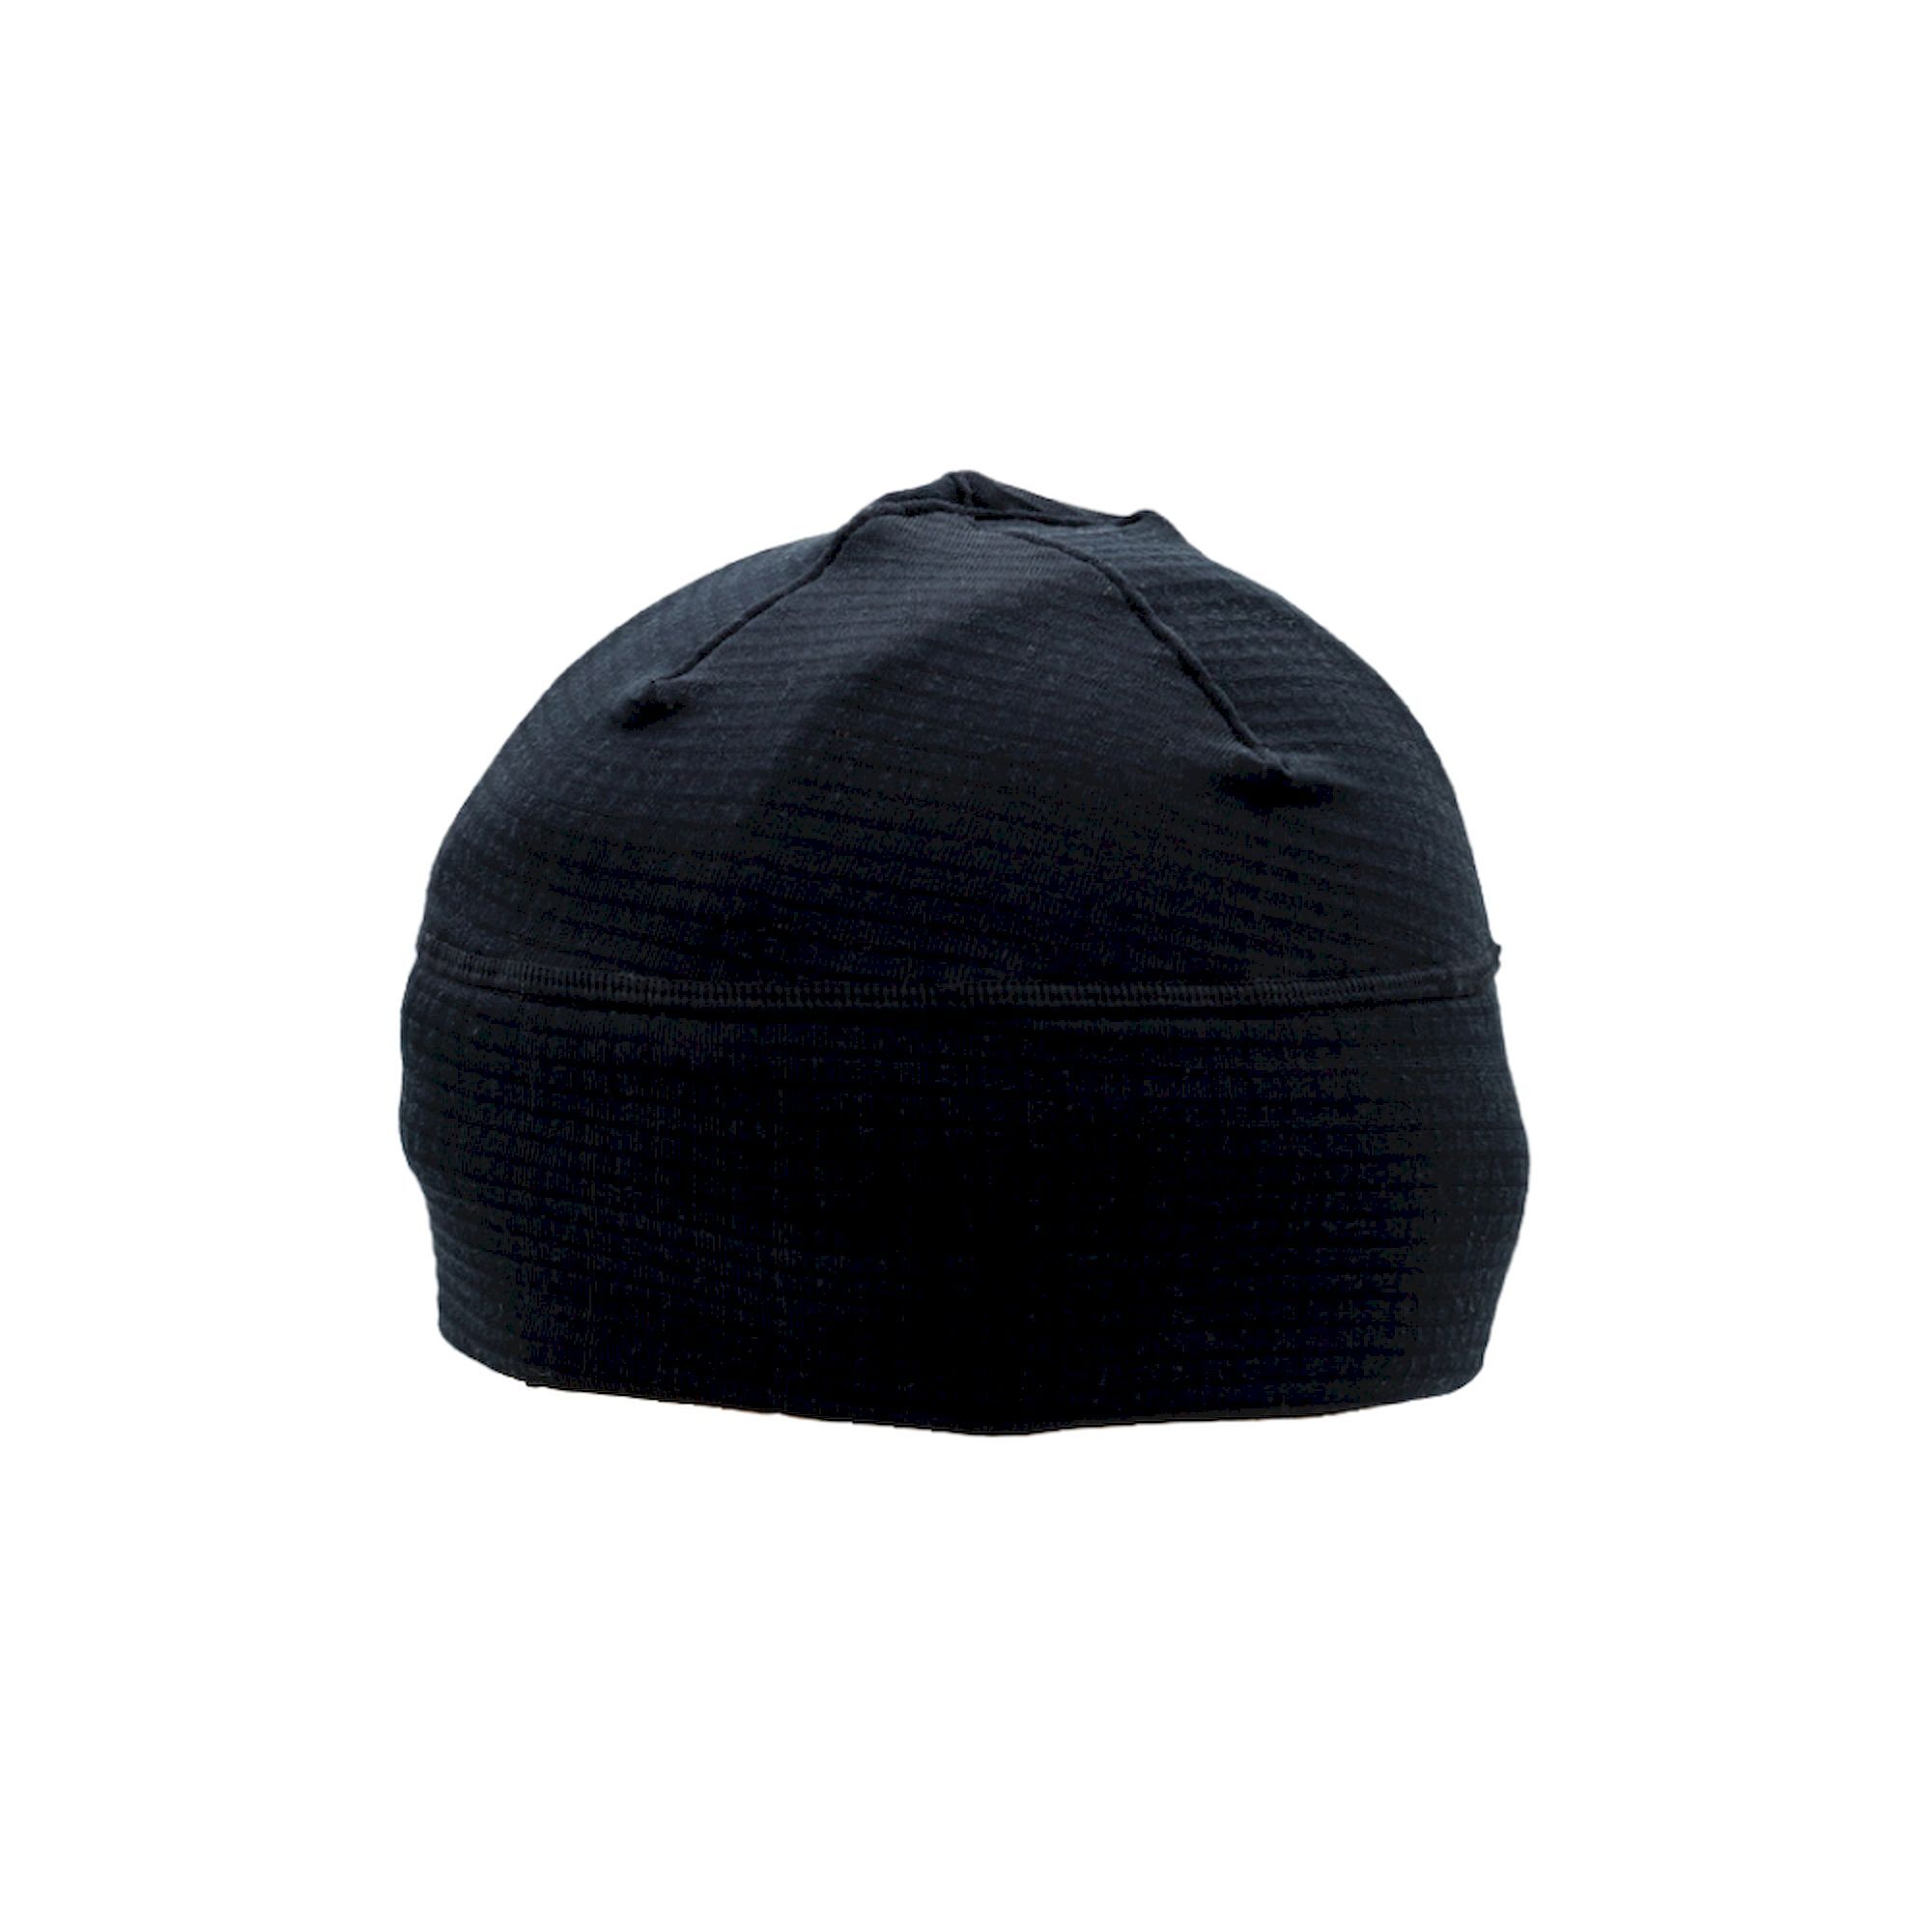 PAG Neckwear Technical Hat - Beanie